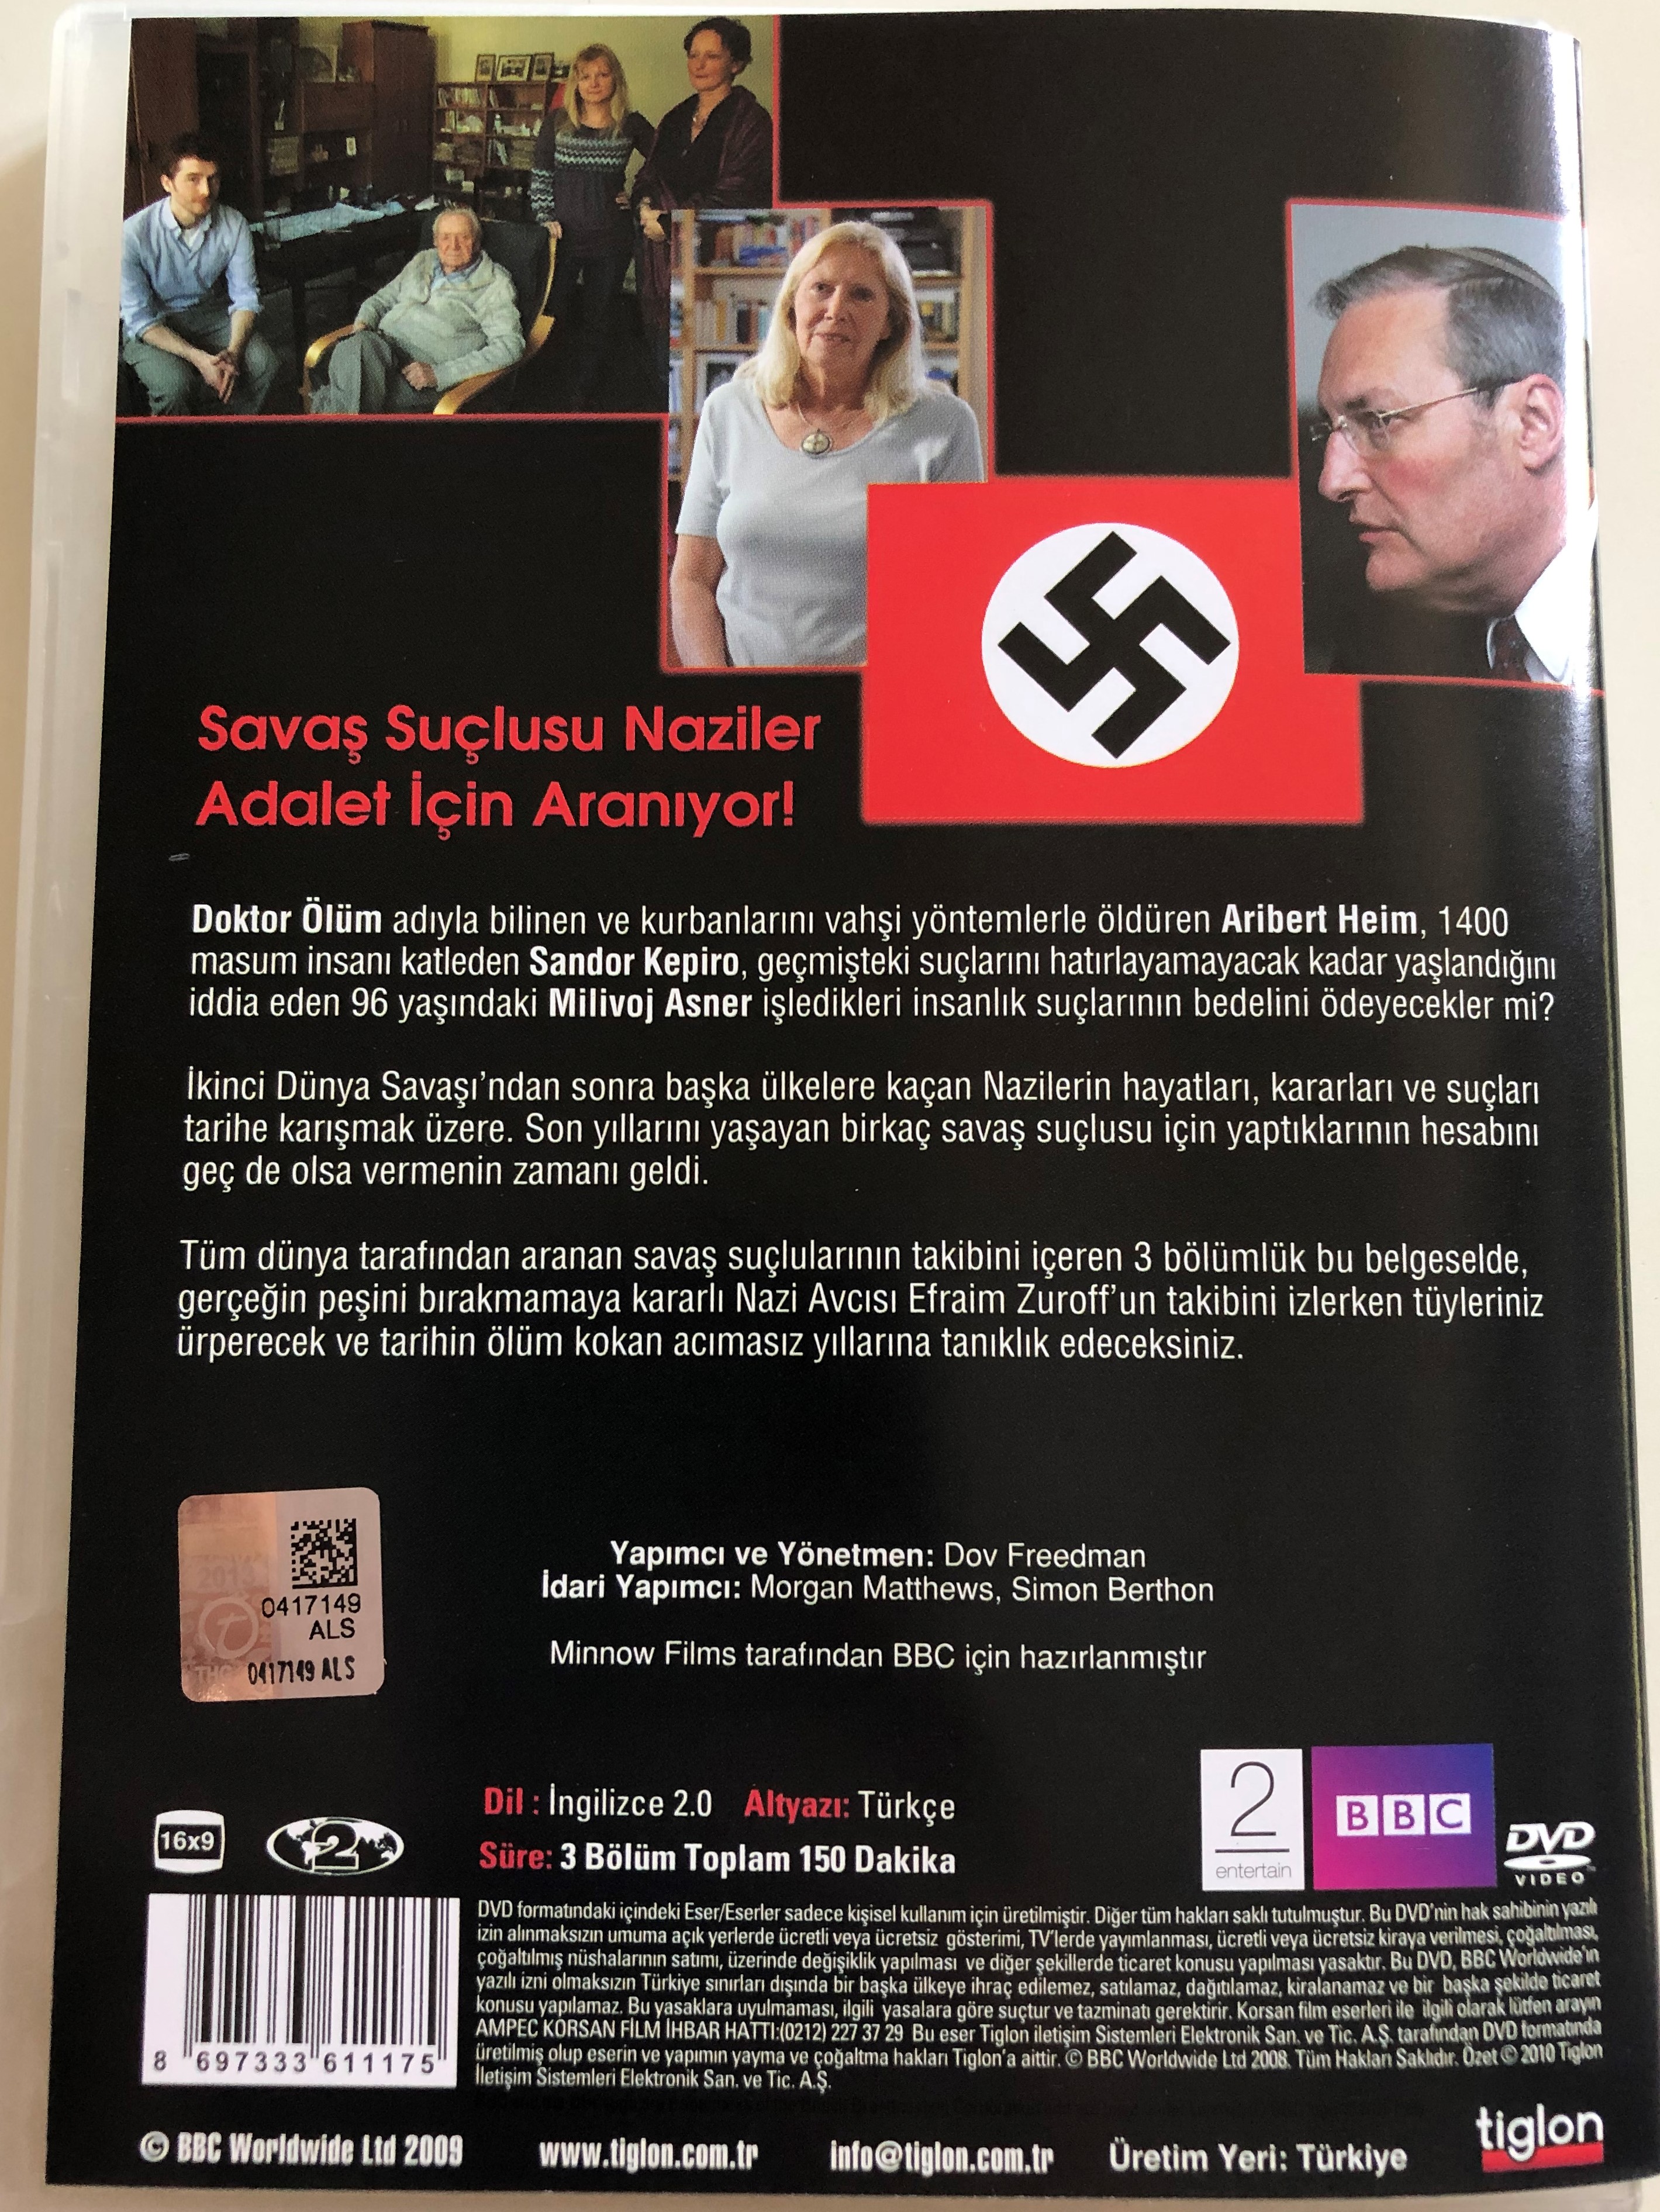 son-naziler-dvd-2009-the-last-nazis-bbc-3-part-documentary-about-the-last-remaining-nazi-war-criminals-narrated-by-david-morrissey-2-.jpg